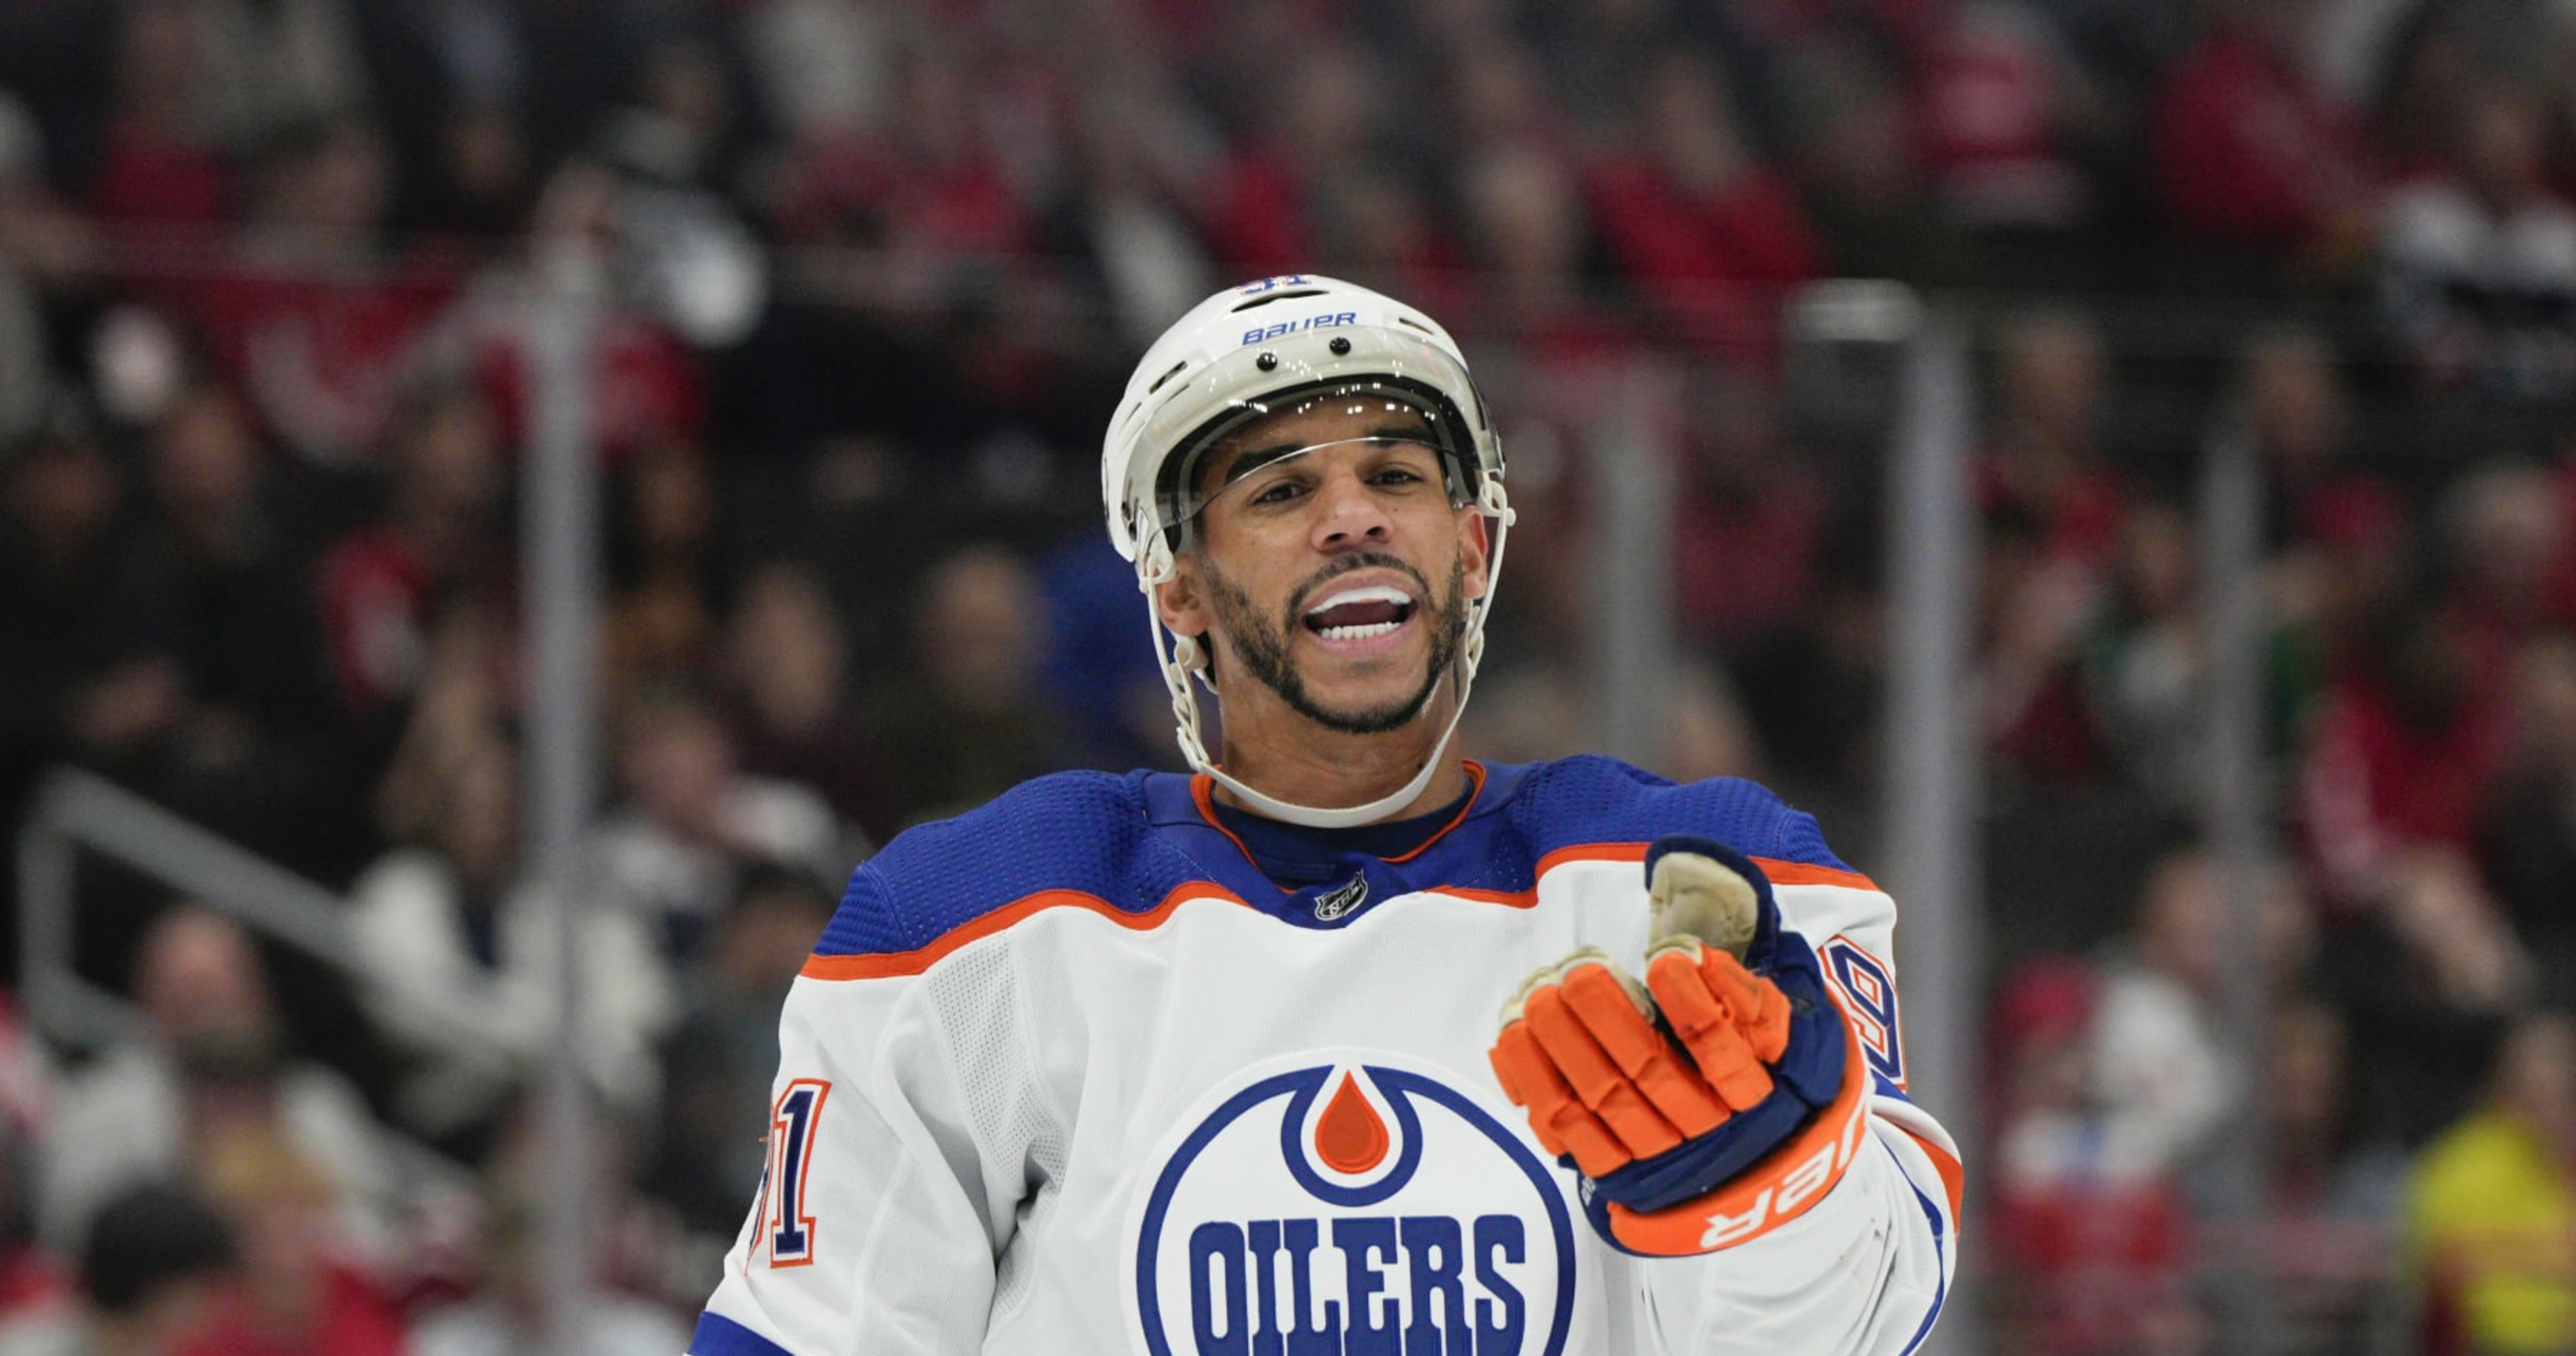 Oilers' Evander Kane Hospitalized After Suffering 'Deep Cut' on Wrist